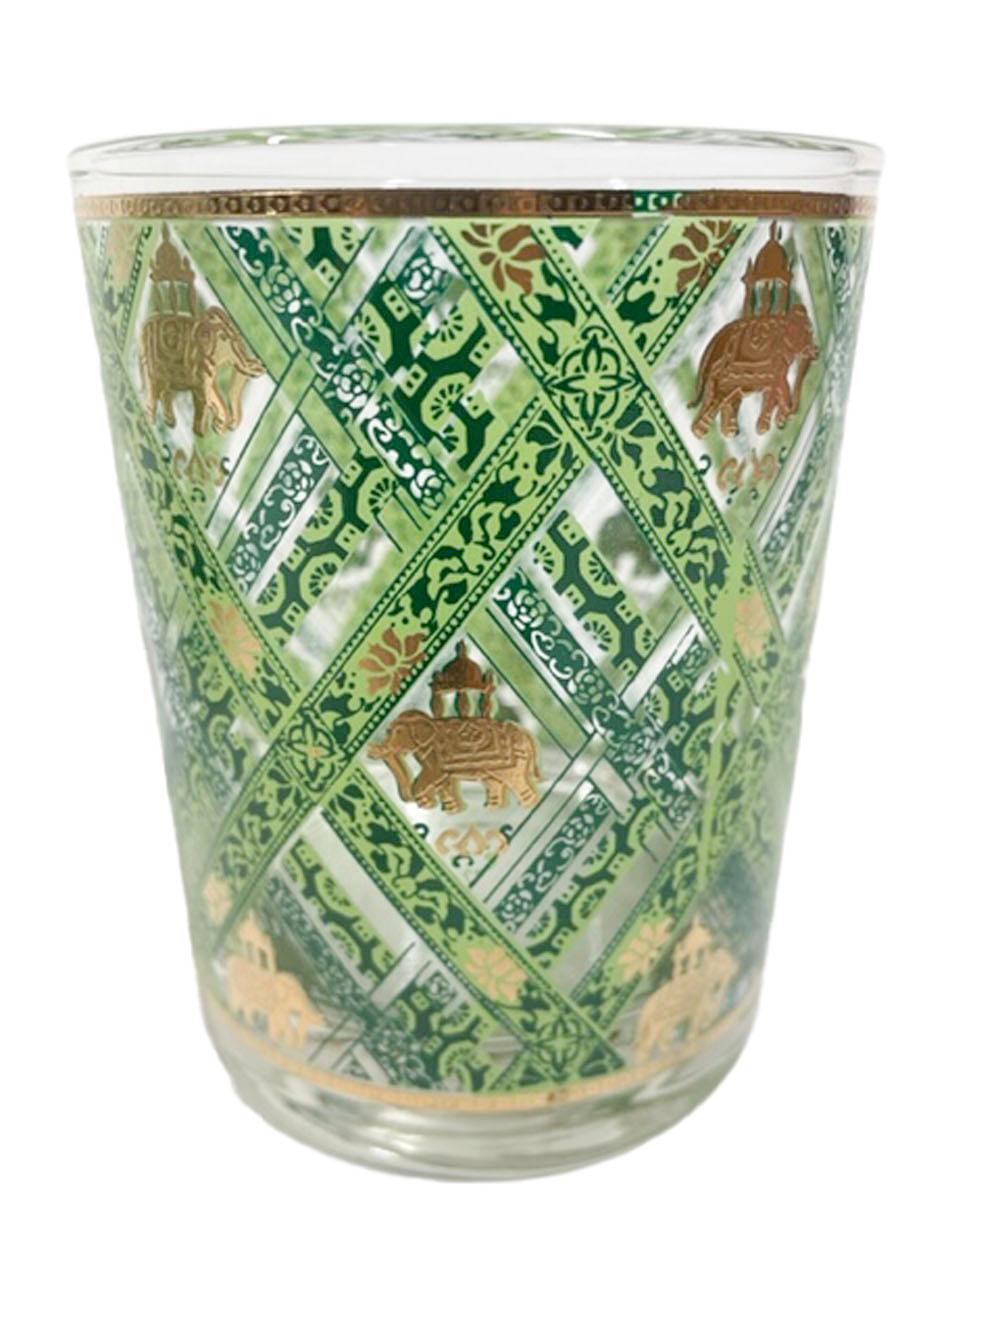 Mid-Century Modern rocks glasses by Cera Glassware decorated with a leafy green-on-green lattice pattern with 22k gold caparisoned Mughal elephants in the openings.